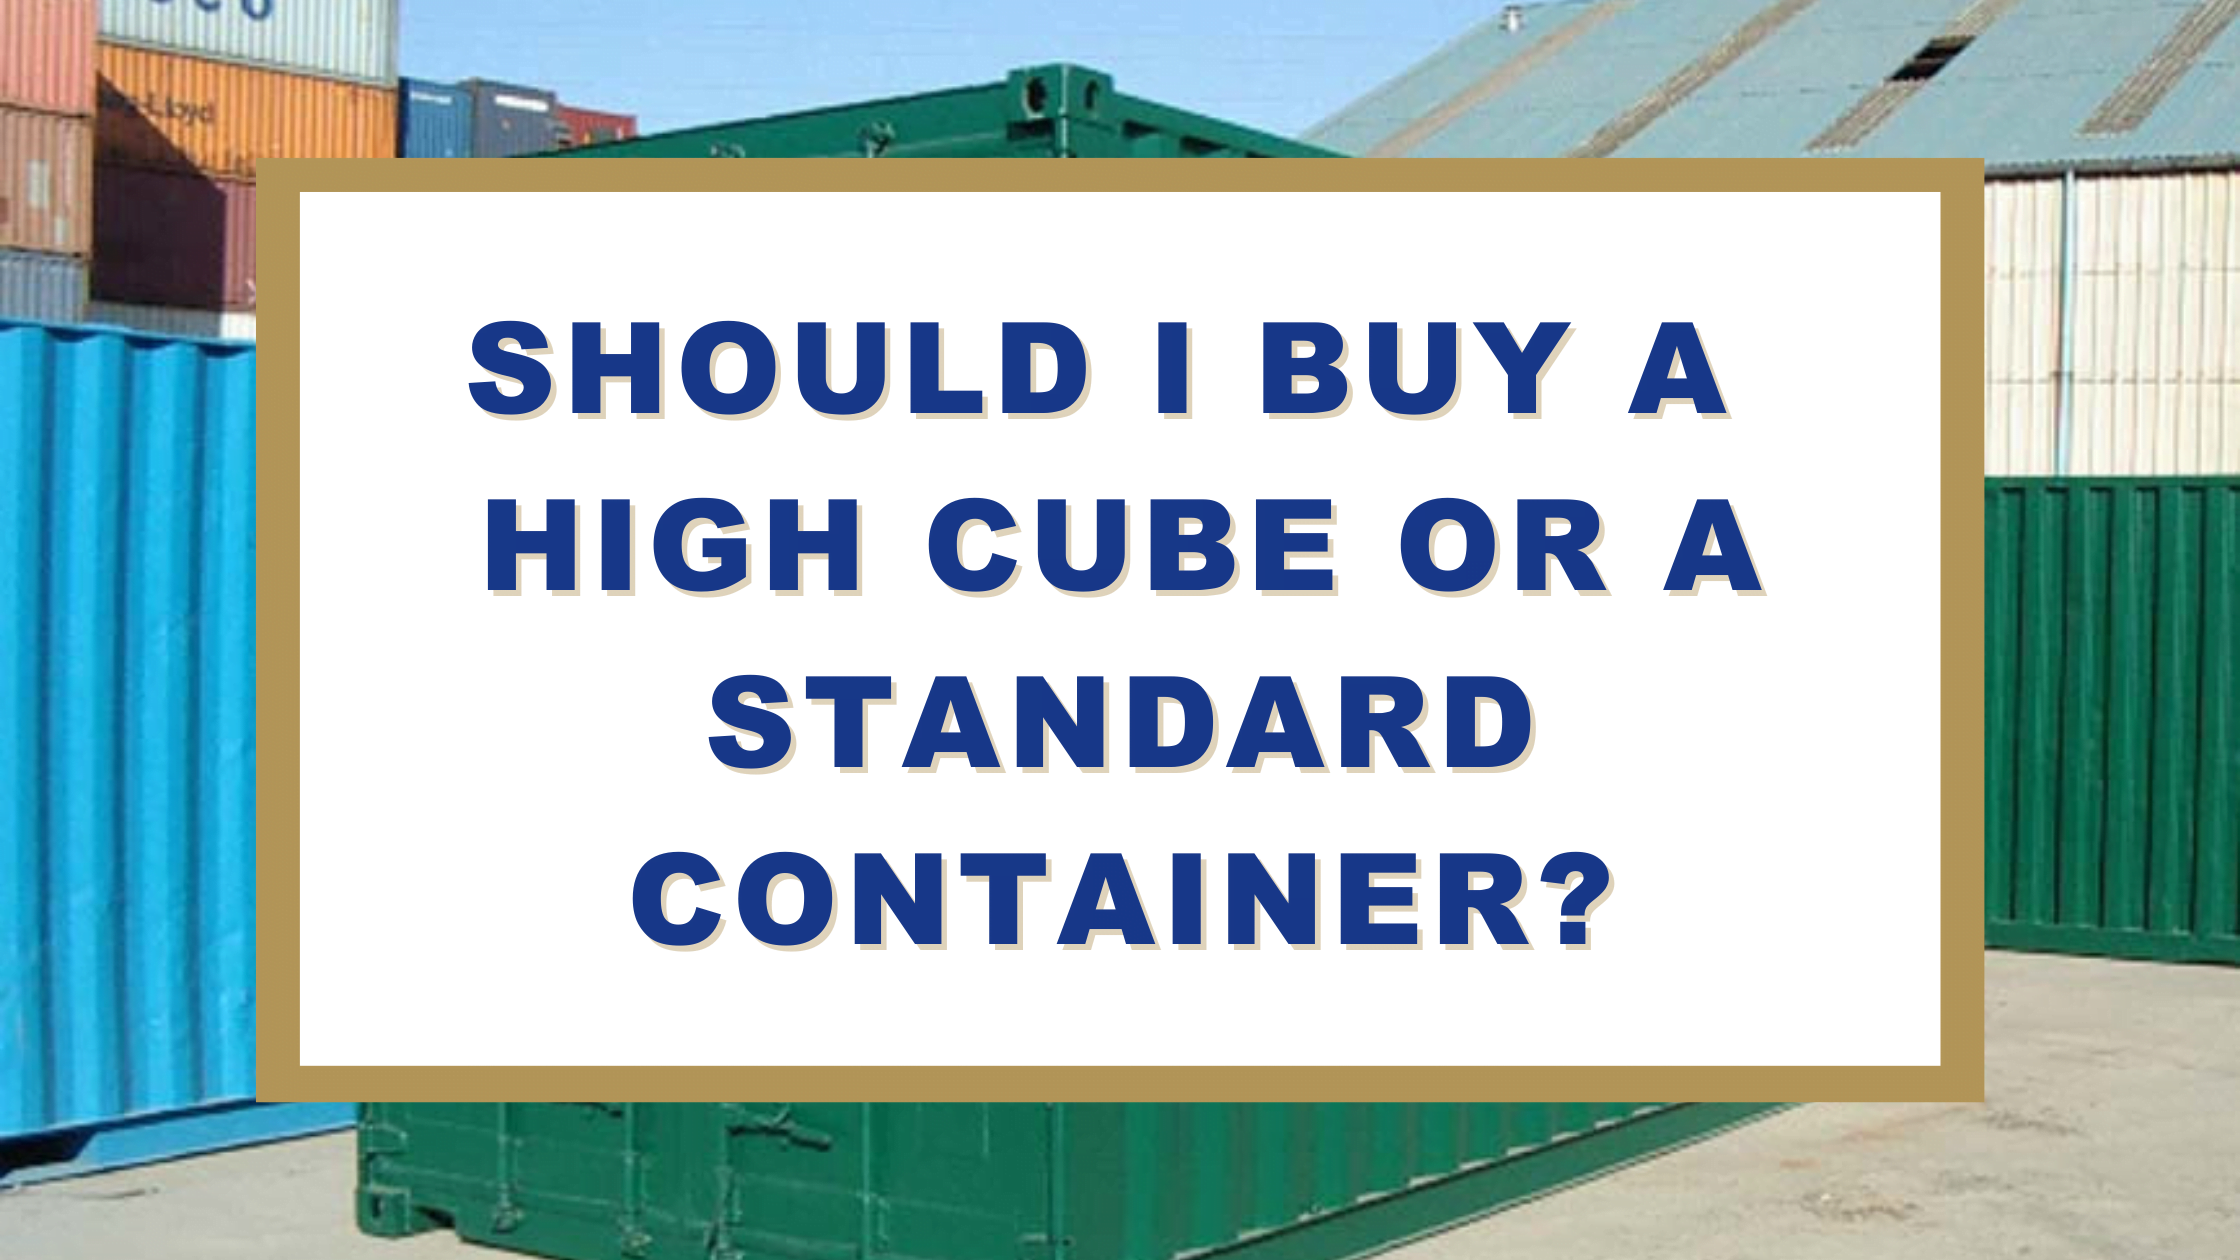 Shipping Container Size: Should I Buy a High Cube or a Standard Container?